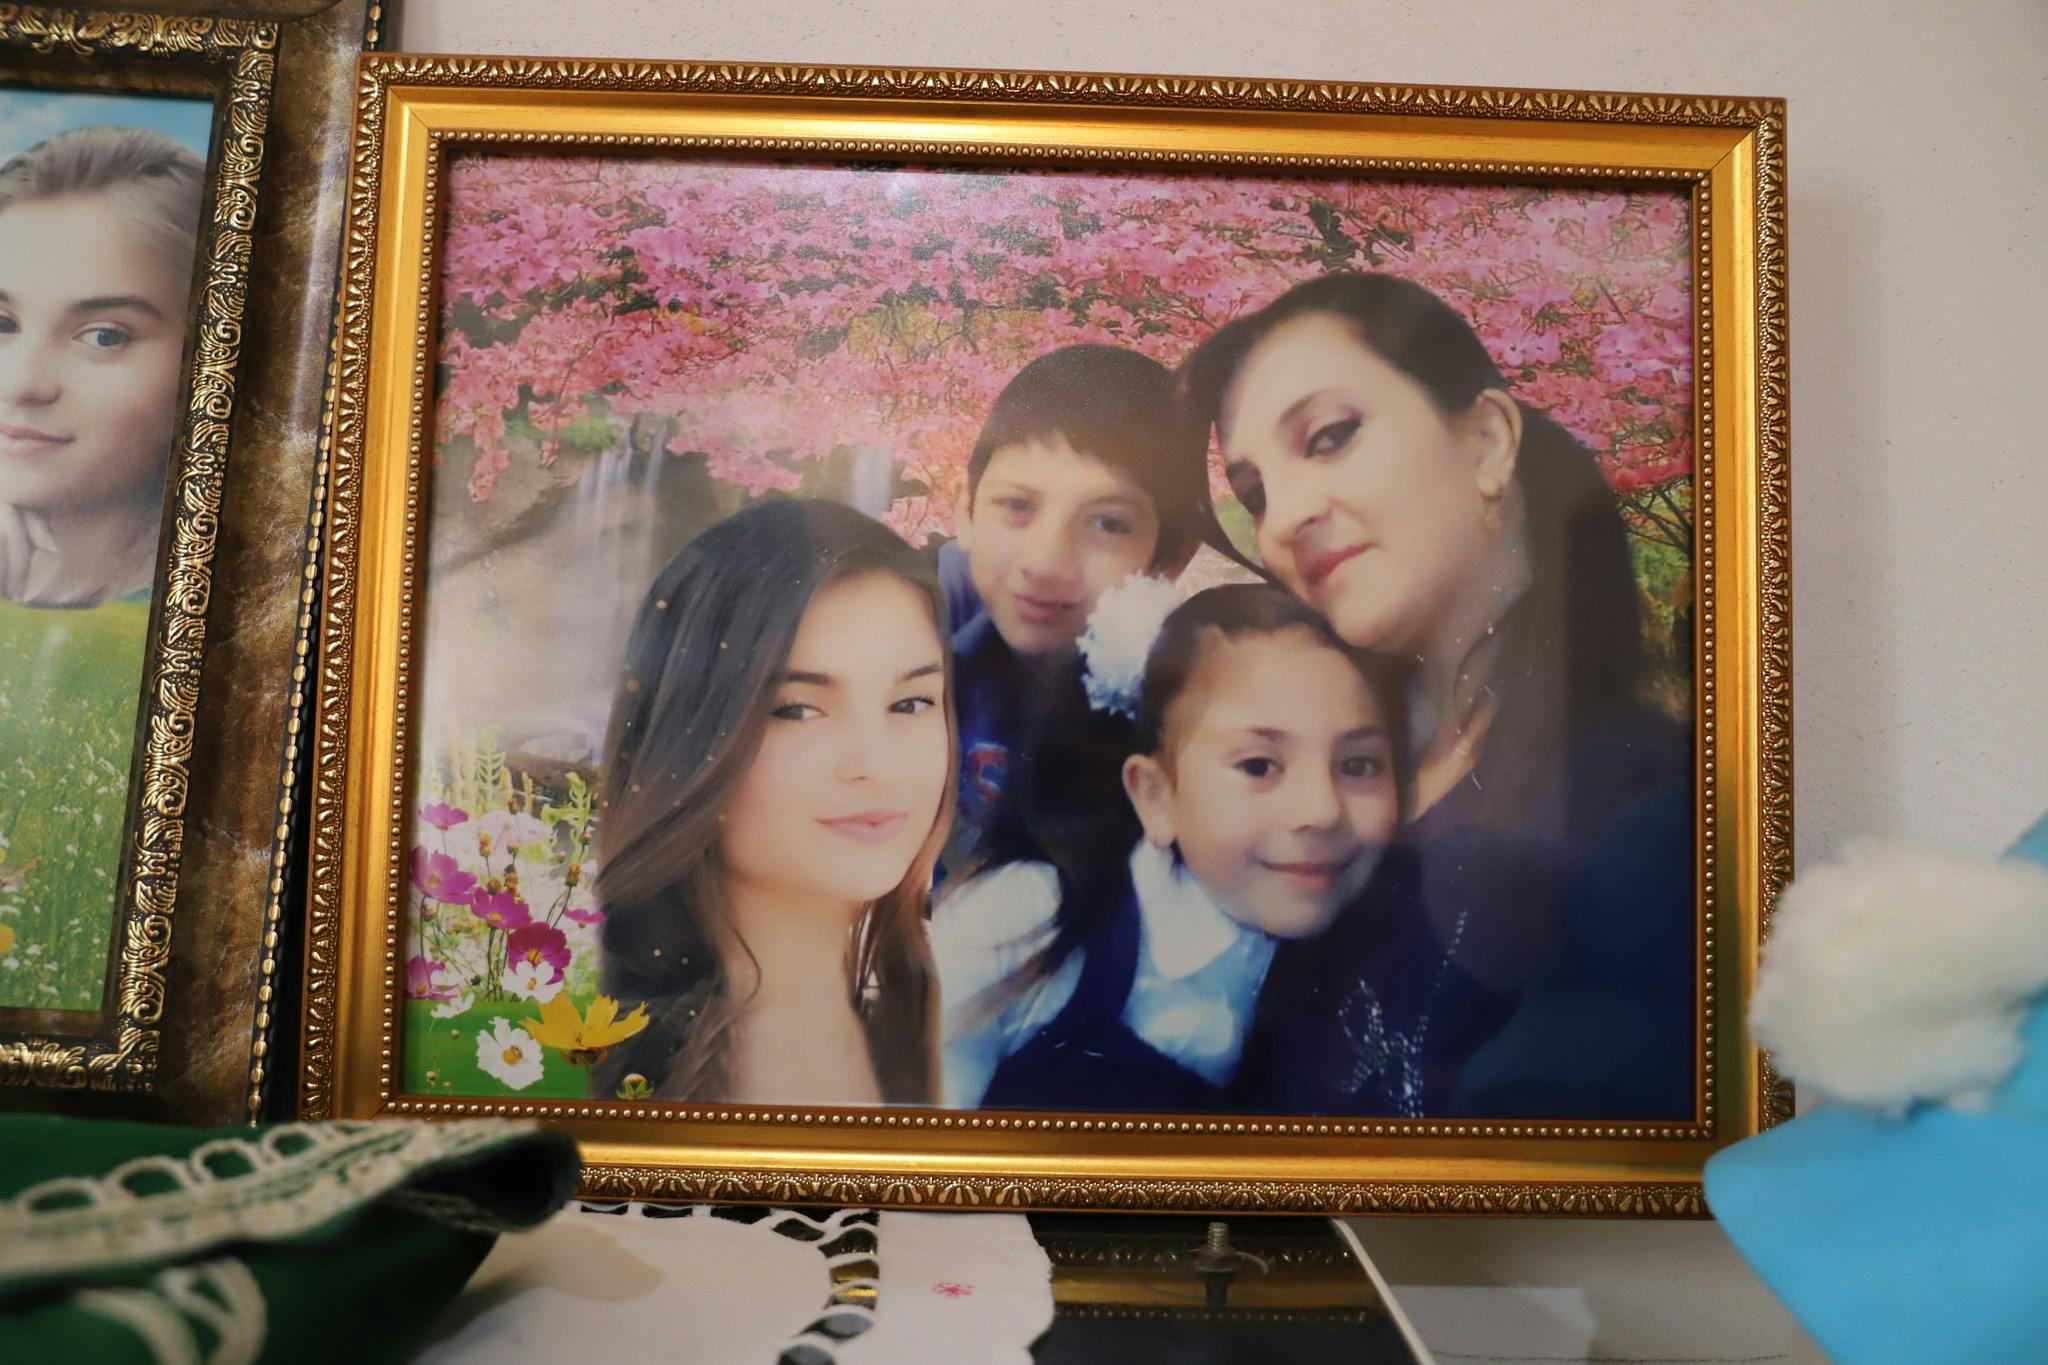  	Four victims of the Ramiz family who were killed in the Mukhtar Hajiyev neighbourhood of GANJA, in Azerbaijan, by a Scud ballistic missile launched by Armenian forces, on 17 October 2020 which killed 21 civilians and destroyed dozens of houses 